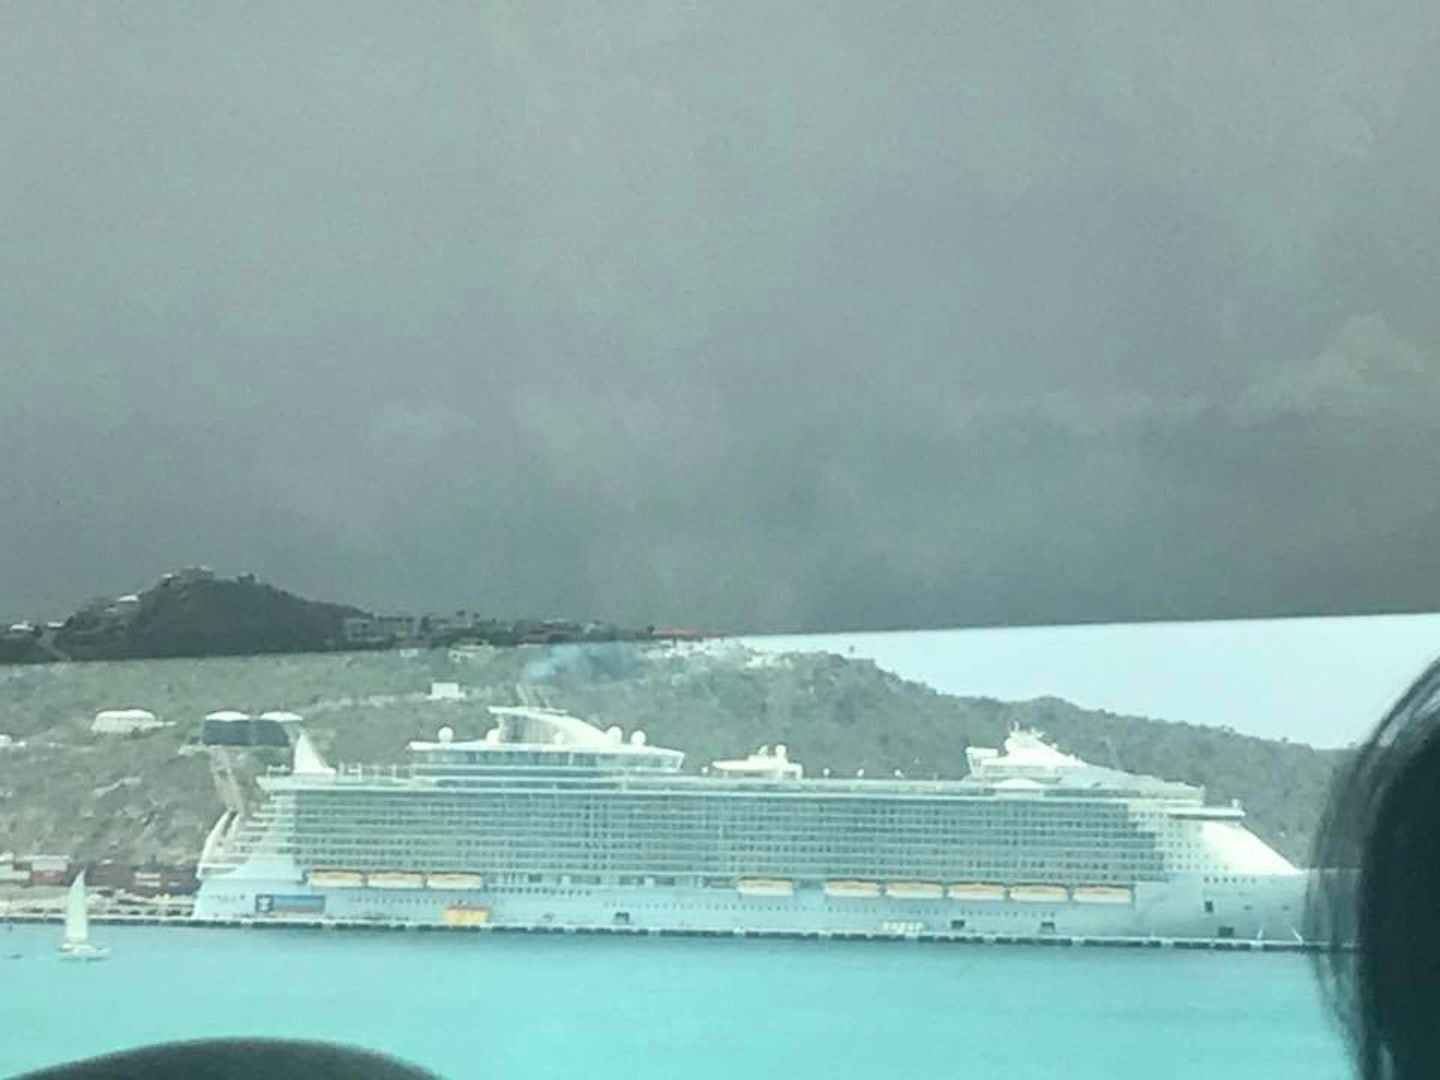 A picture of our ship in St. Maarten taken as we went by on our tour bus.